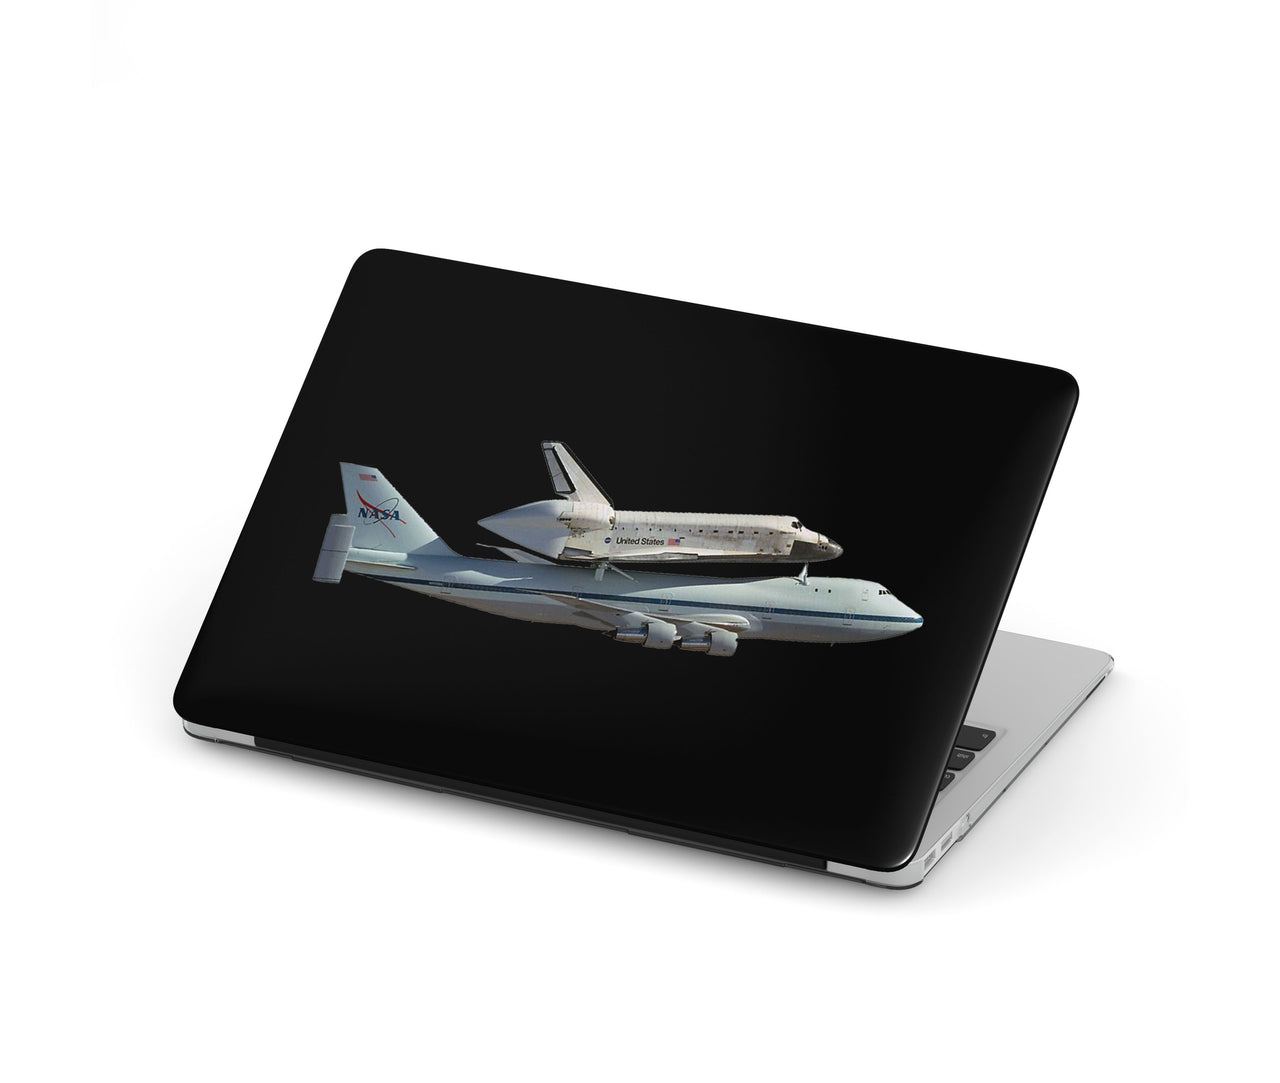 Space shuttle on 747 Designed Macbook Cases